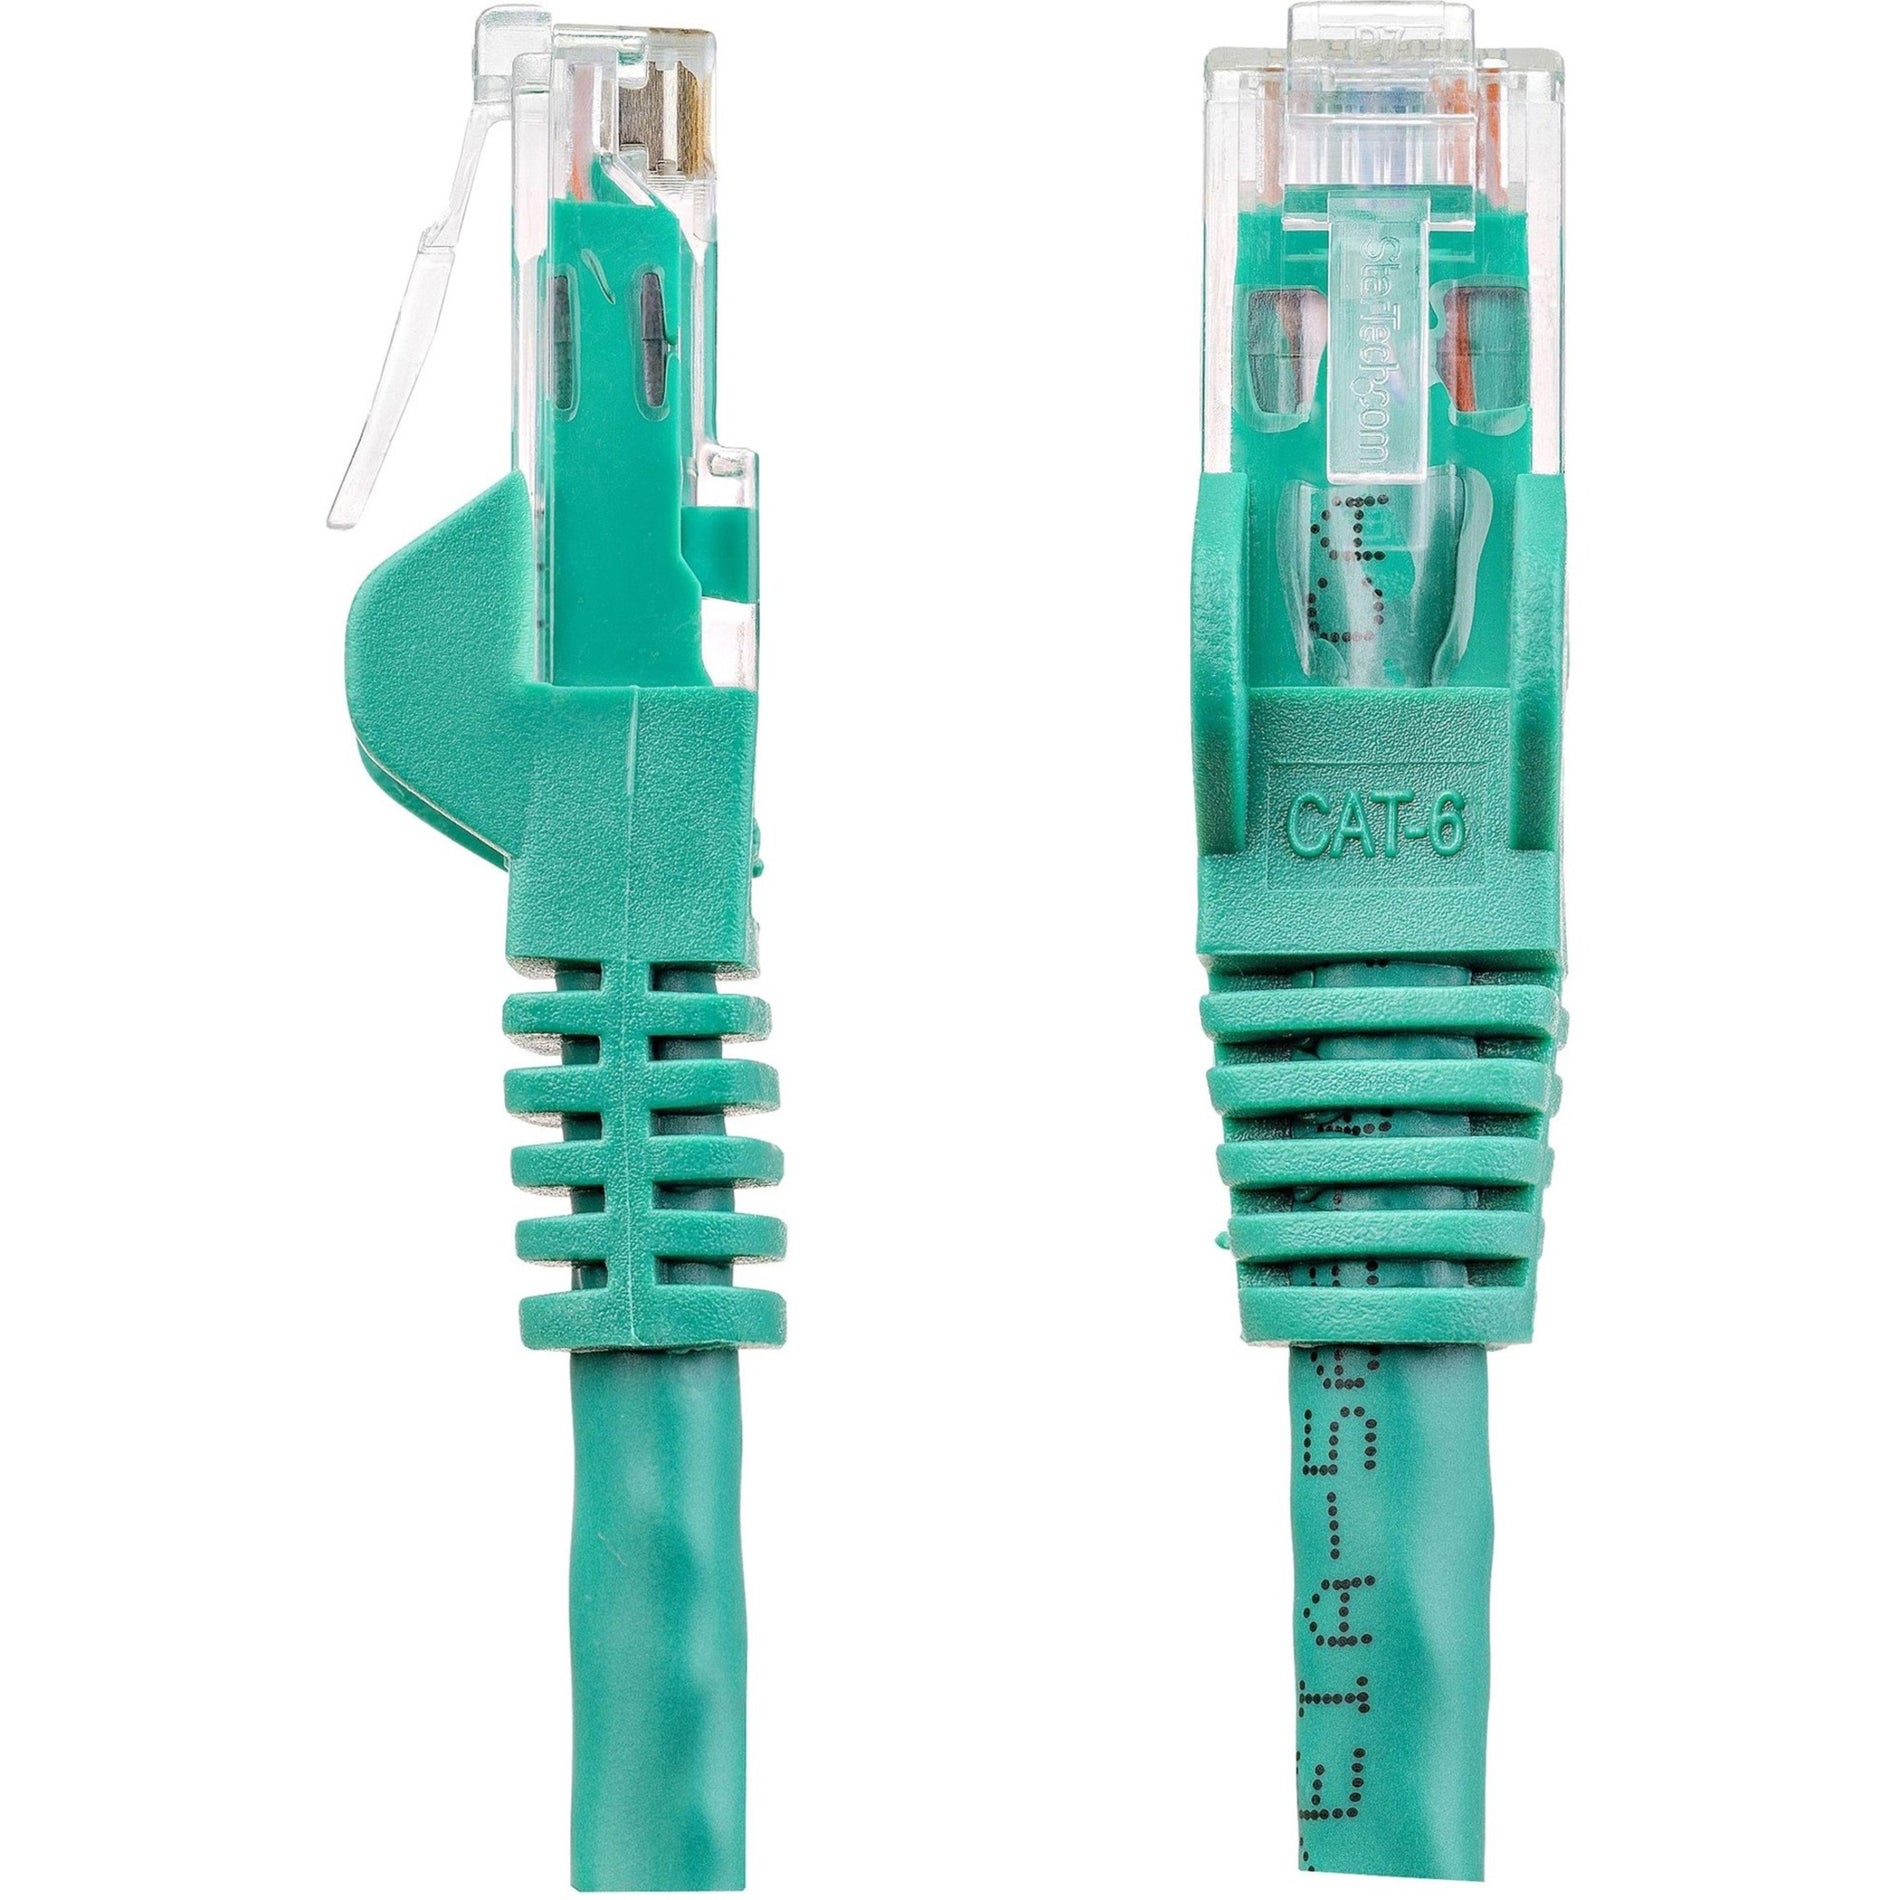 StarTech.com N6PATCH125GN Cat6 Patch Cable with Snagless RJ45 Connectors - Long Ethernet Cable, 125 ft Green Cat 6 UTP Cable